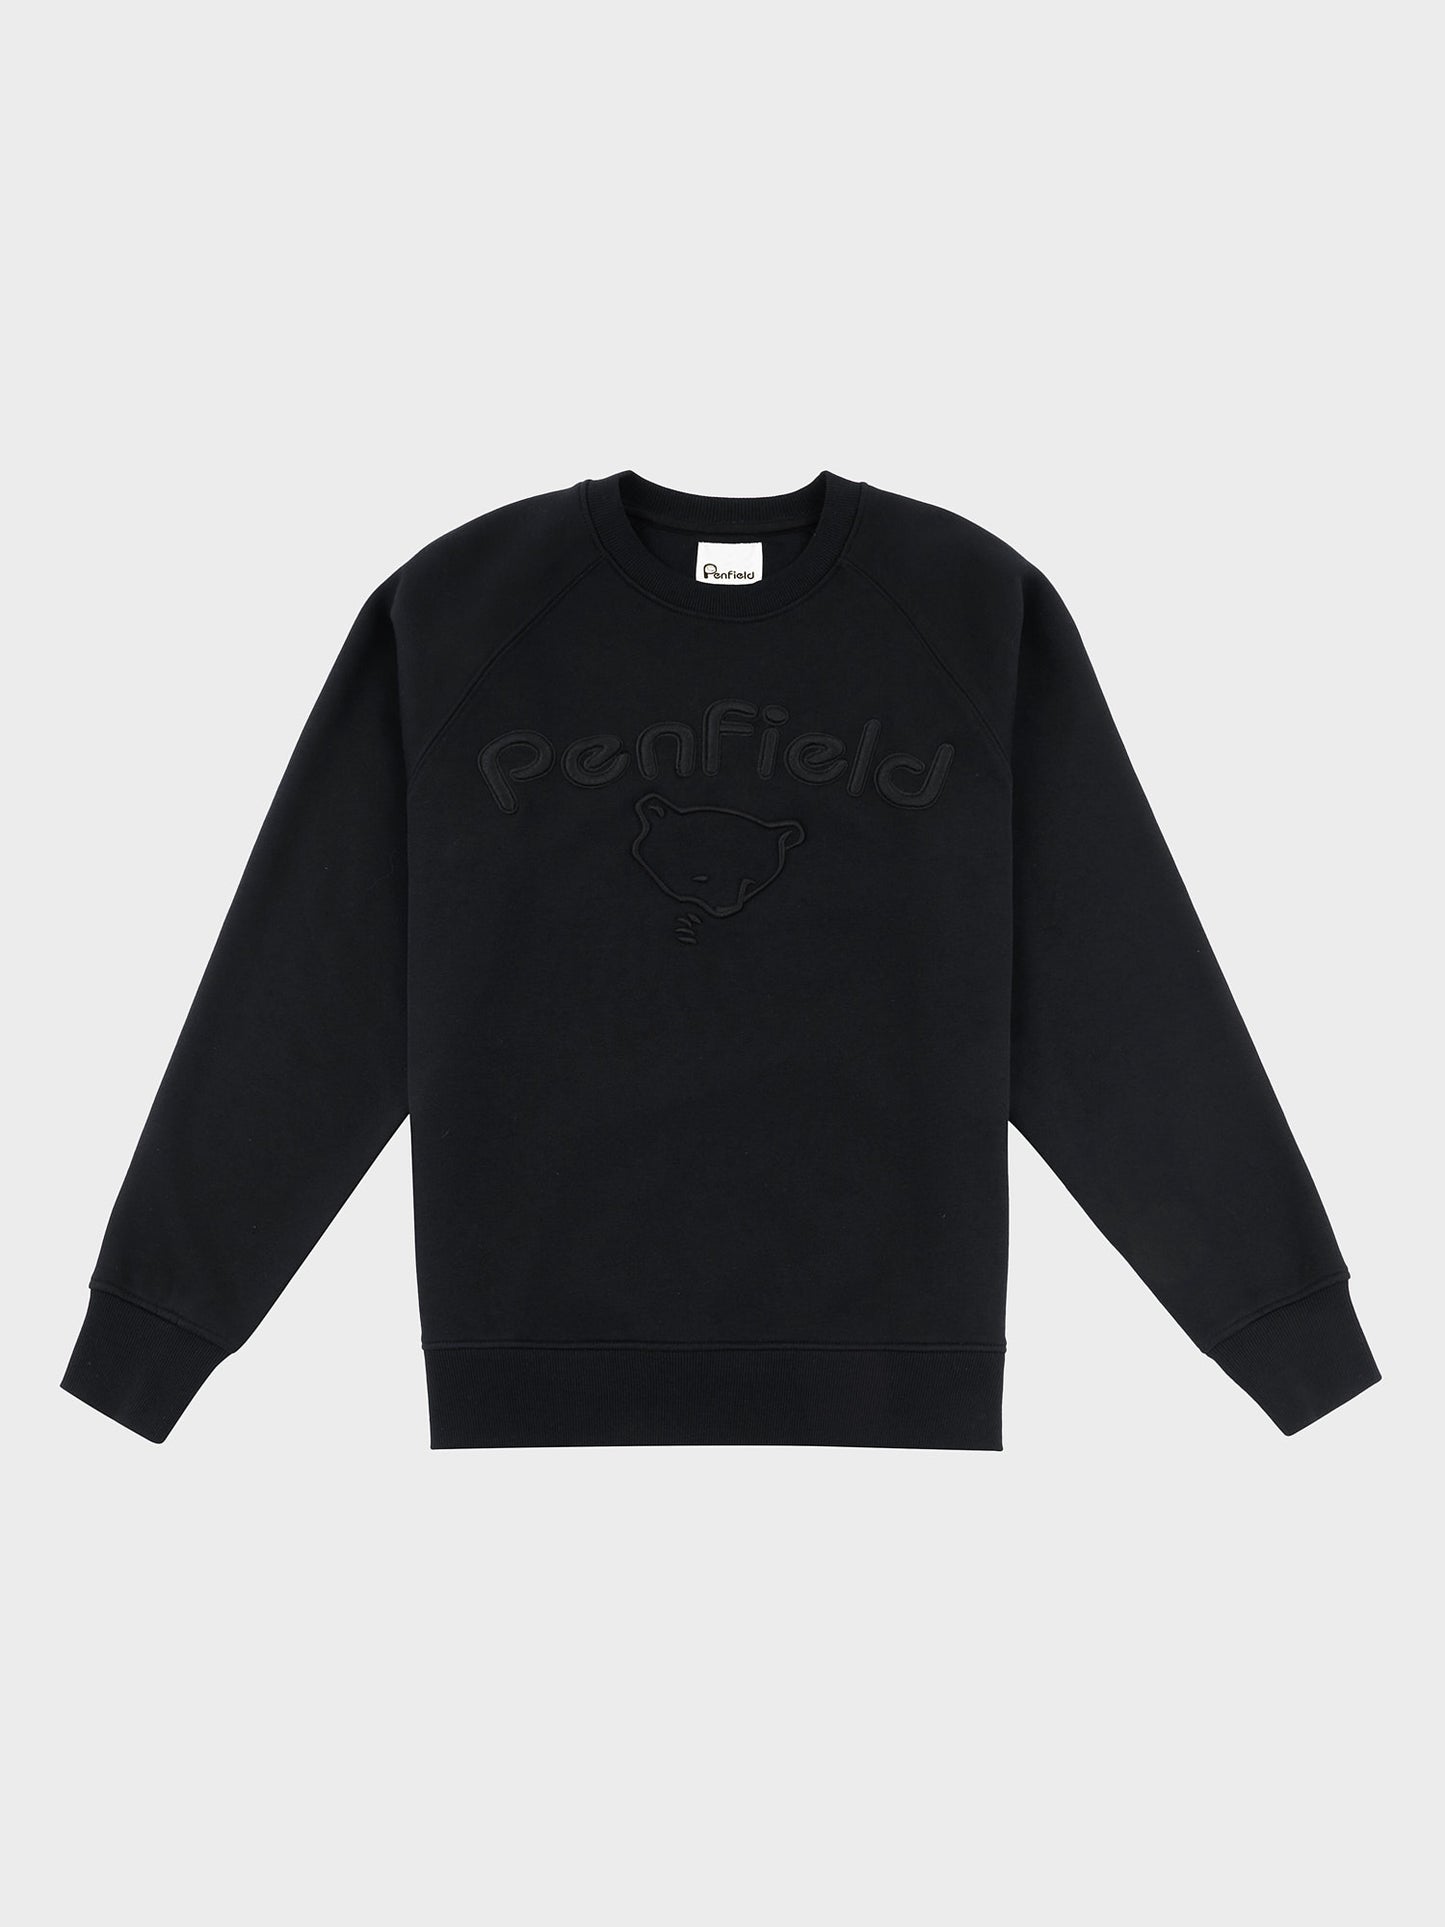 Embroidered Crew Neck Sweater in Black